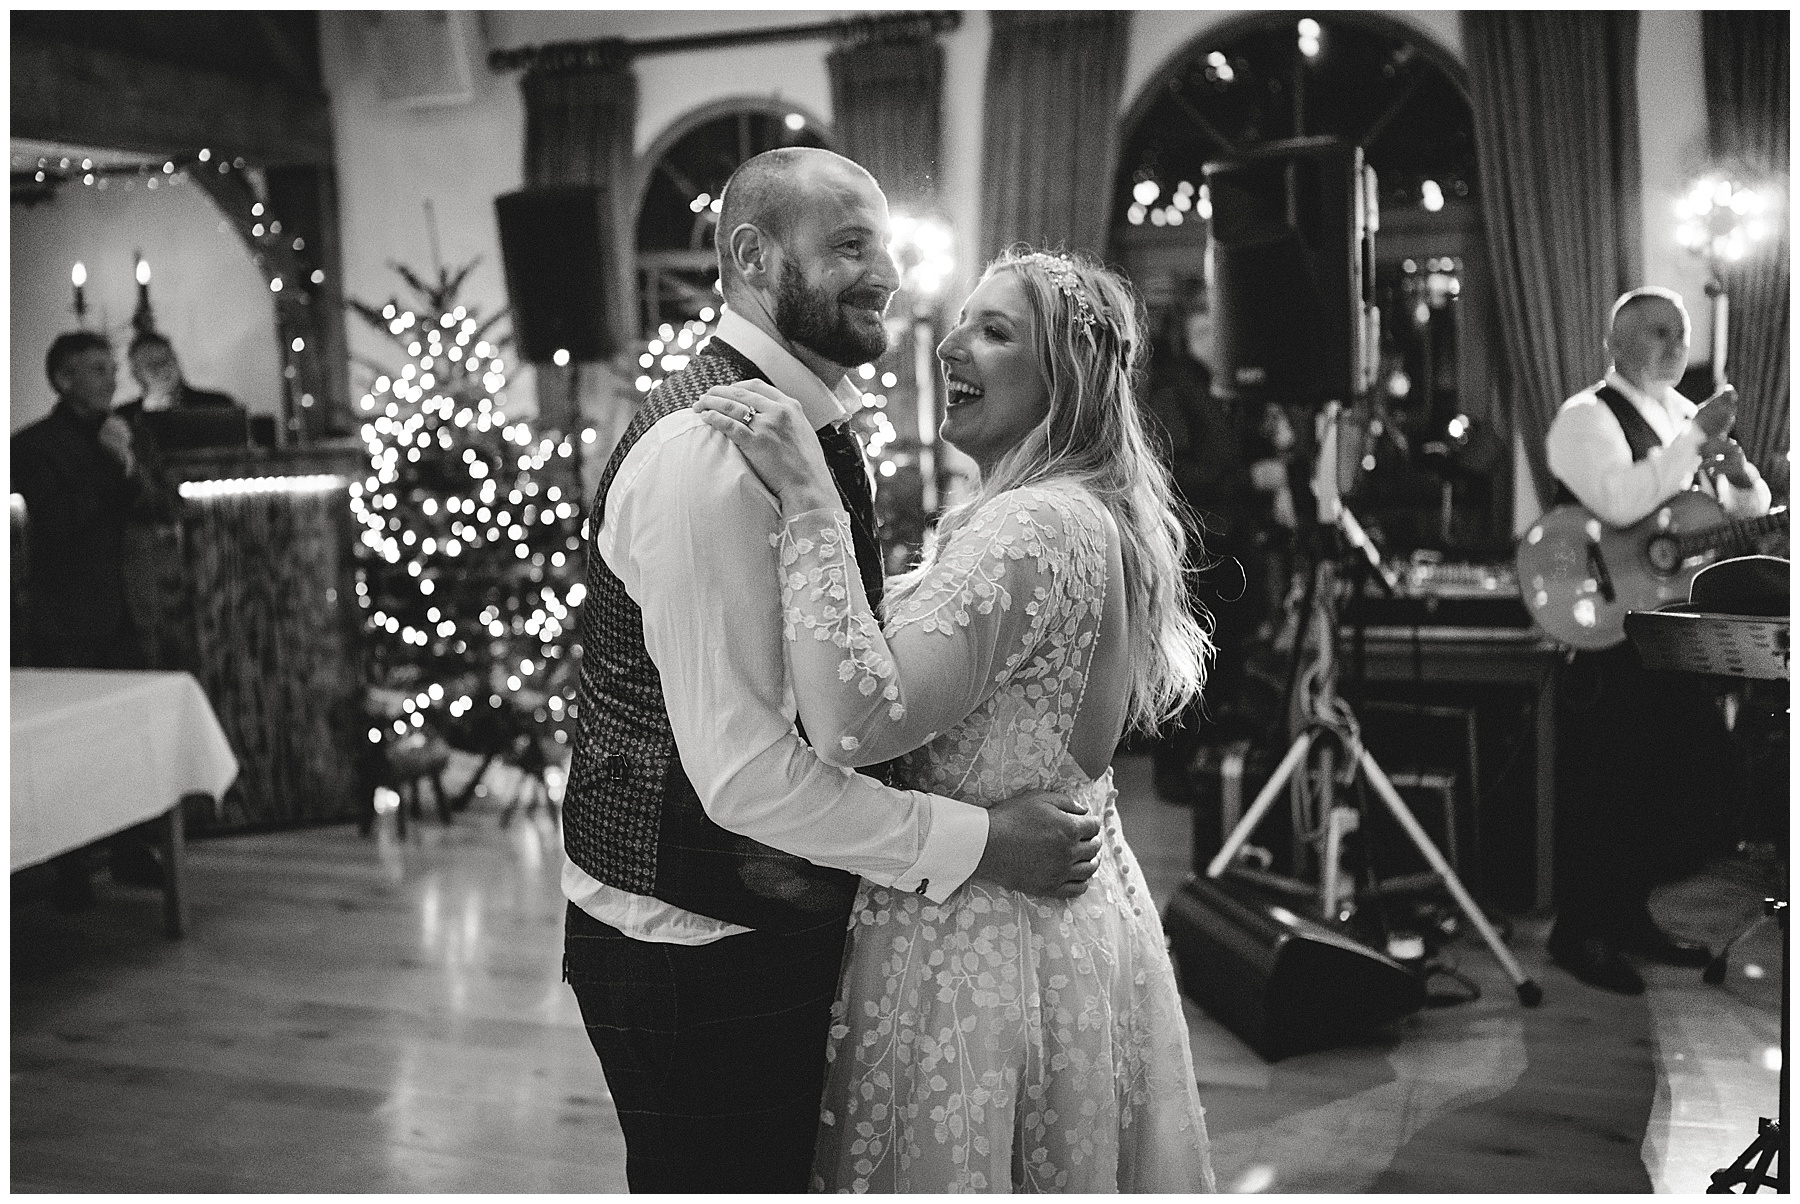 First Dance at South Wales Wedding